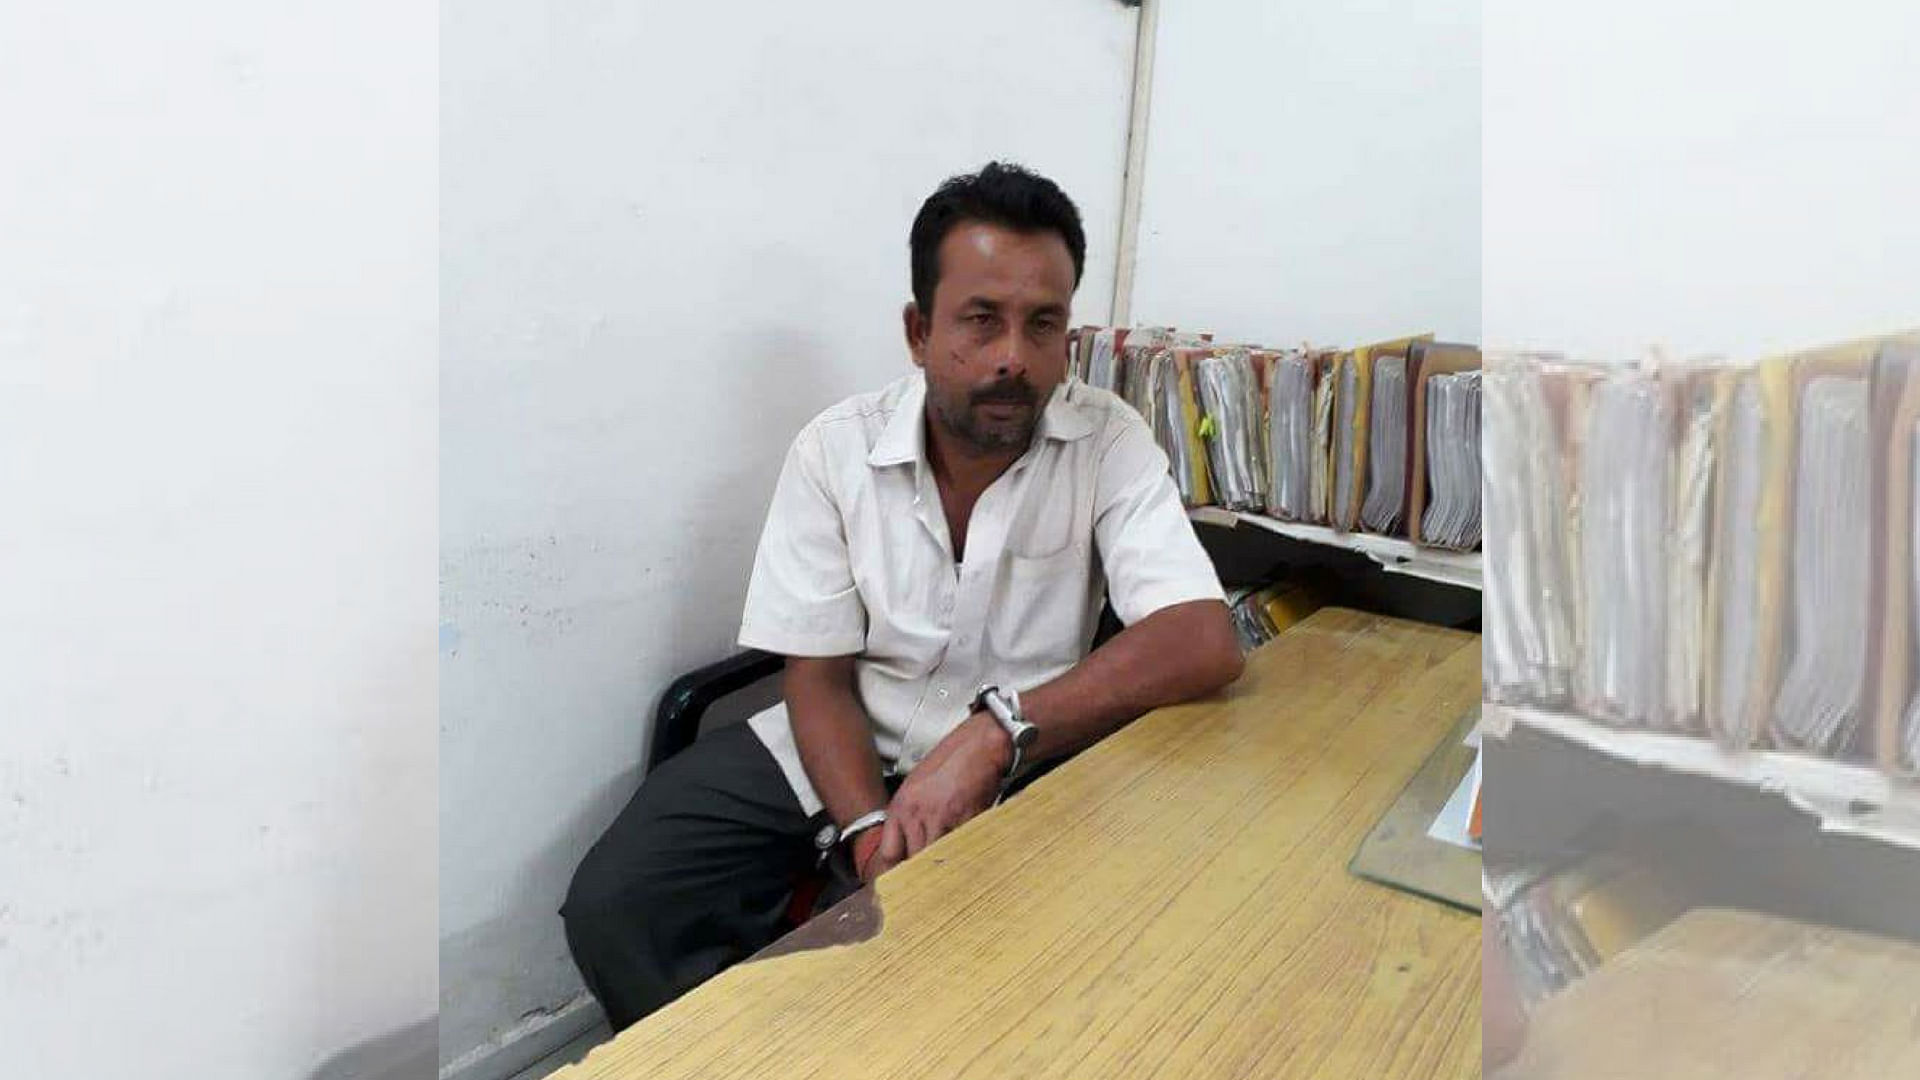 Bikash Das, the primary suspect was arrested by police on 12 July.